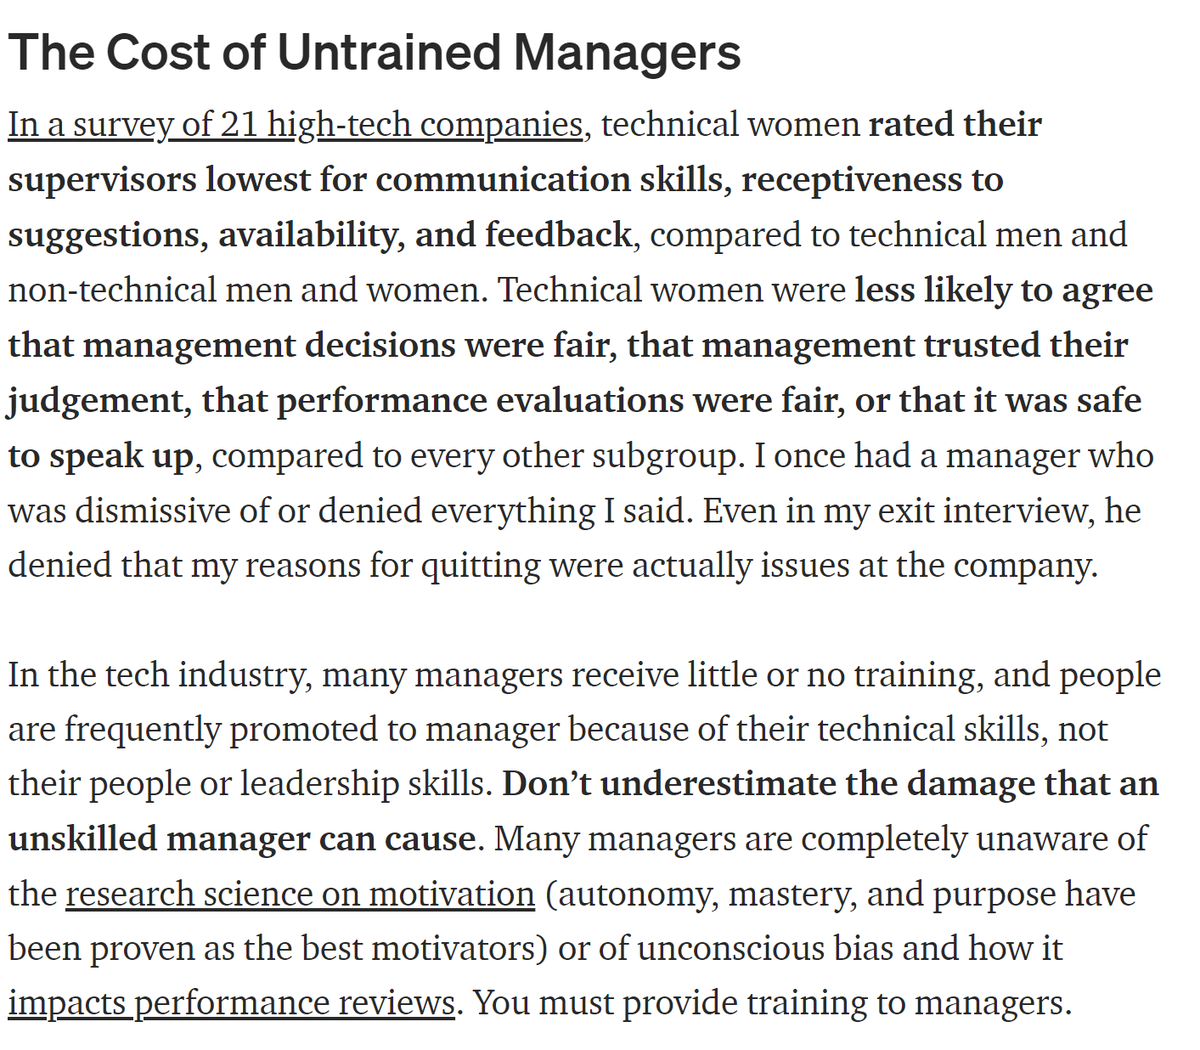 Train the managers at your org: don't underestimate the damage that an untrained & biased manager can cause 10/ https://medium.com/tech-diversity-files/the-real-reason-women-quit-tech-and-how-to-address-it-6dfb606929fd